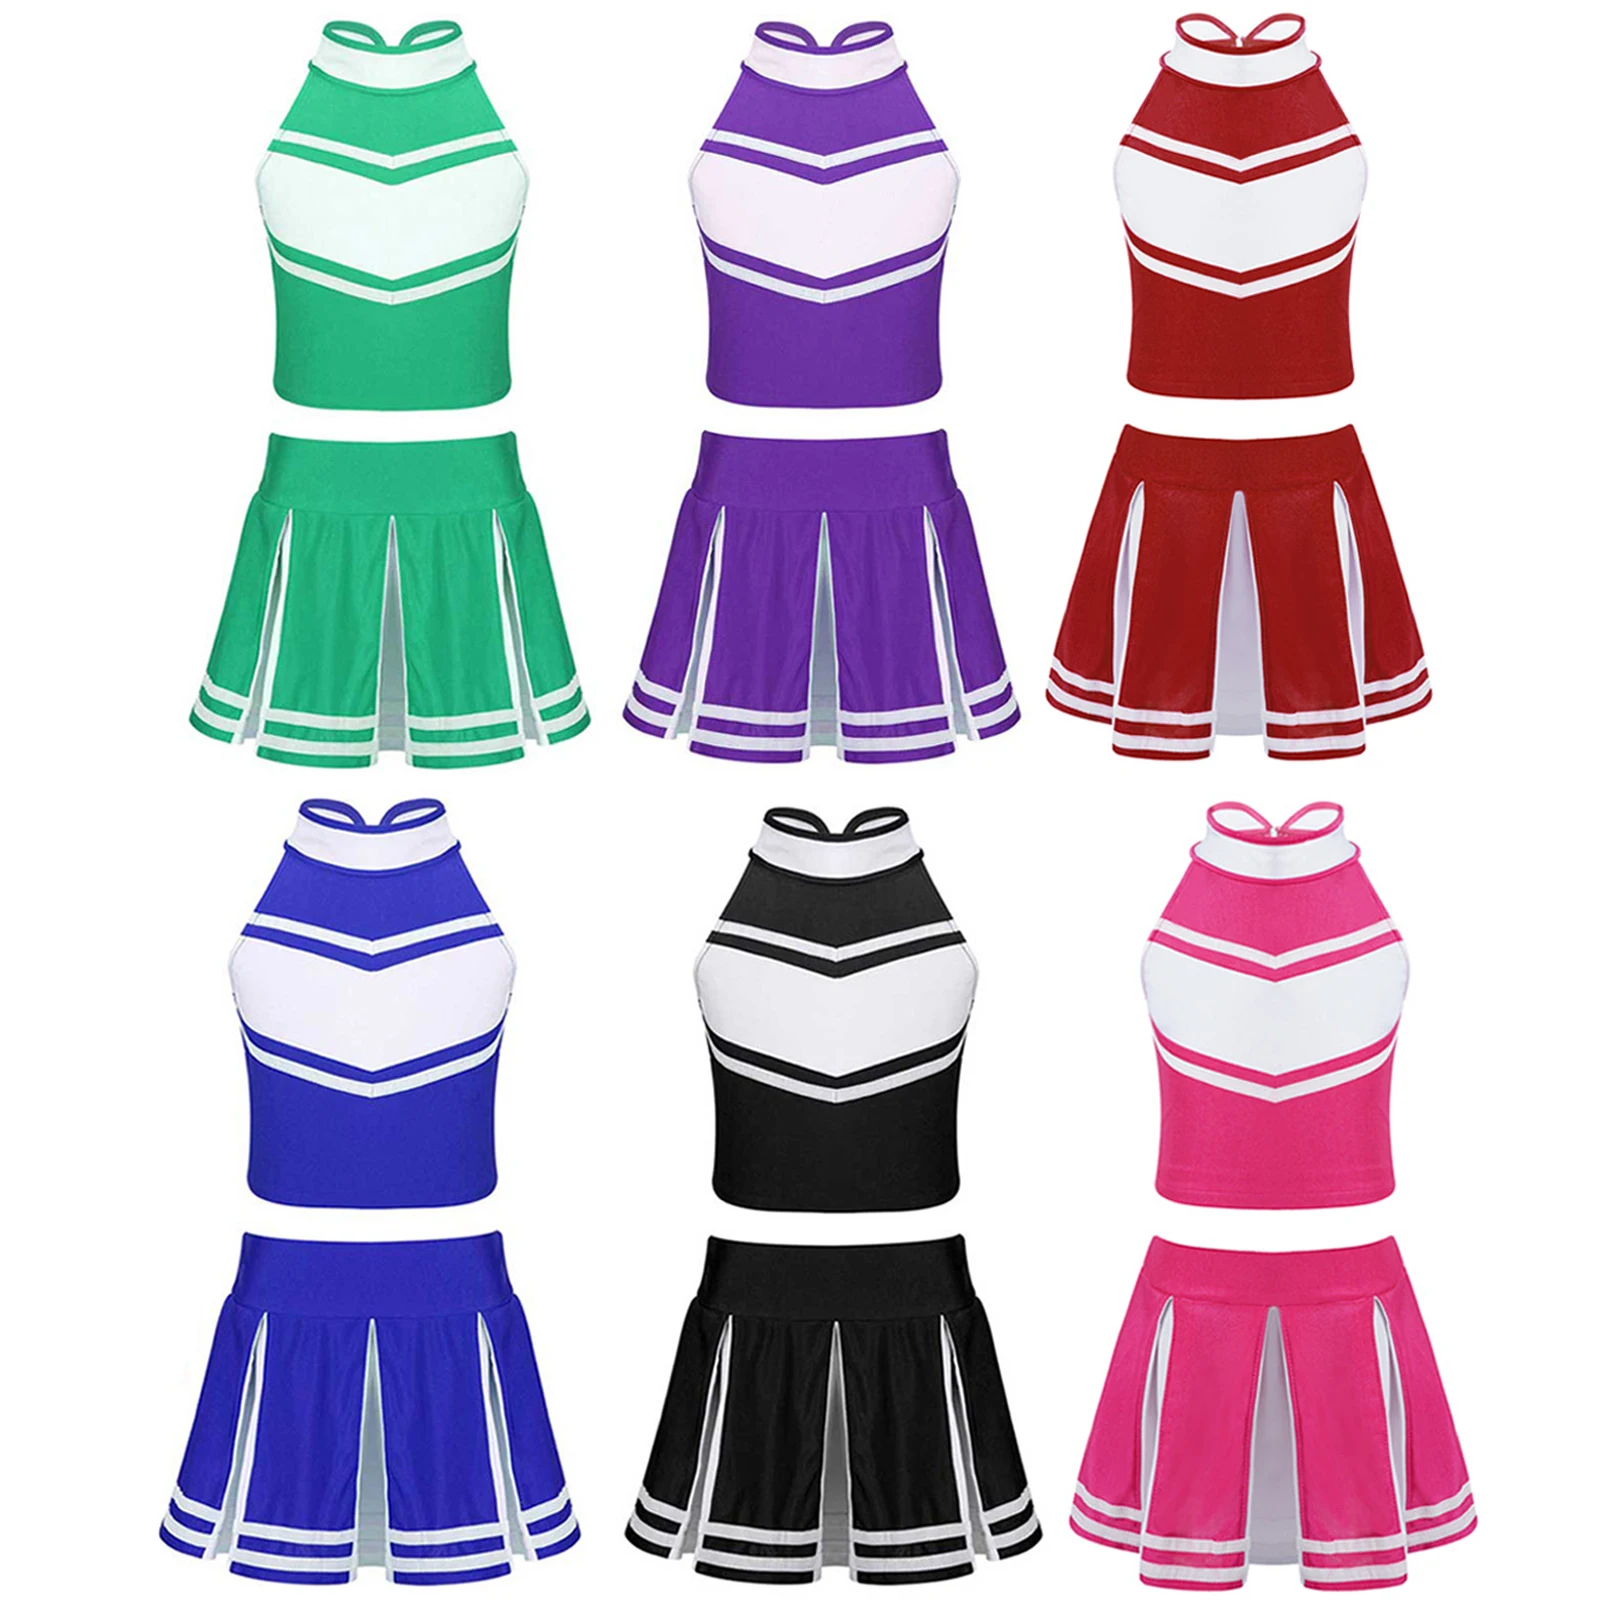 Kids Girls Cheerleading Costume Cheerleader Outfit Sleeveless Zippered Tops with Pleated Skirt School Stage Performance Clothes